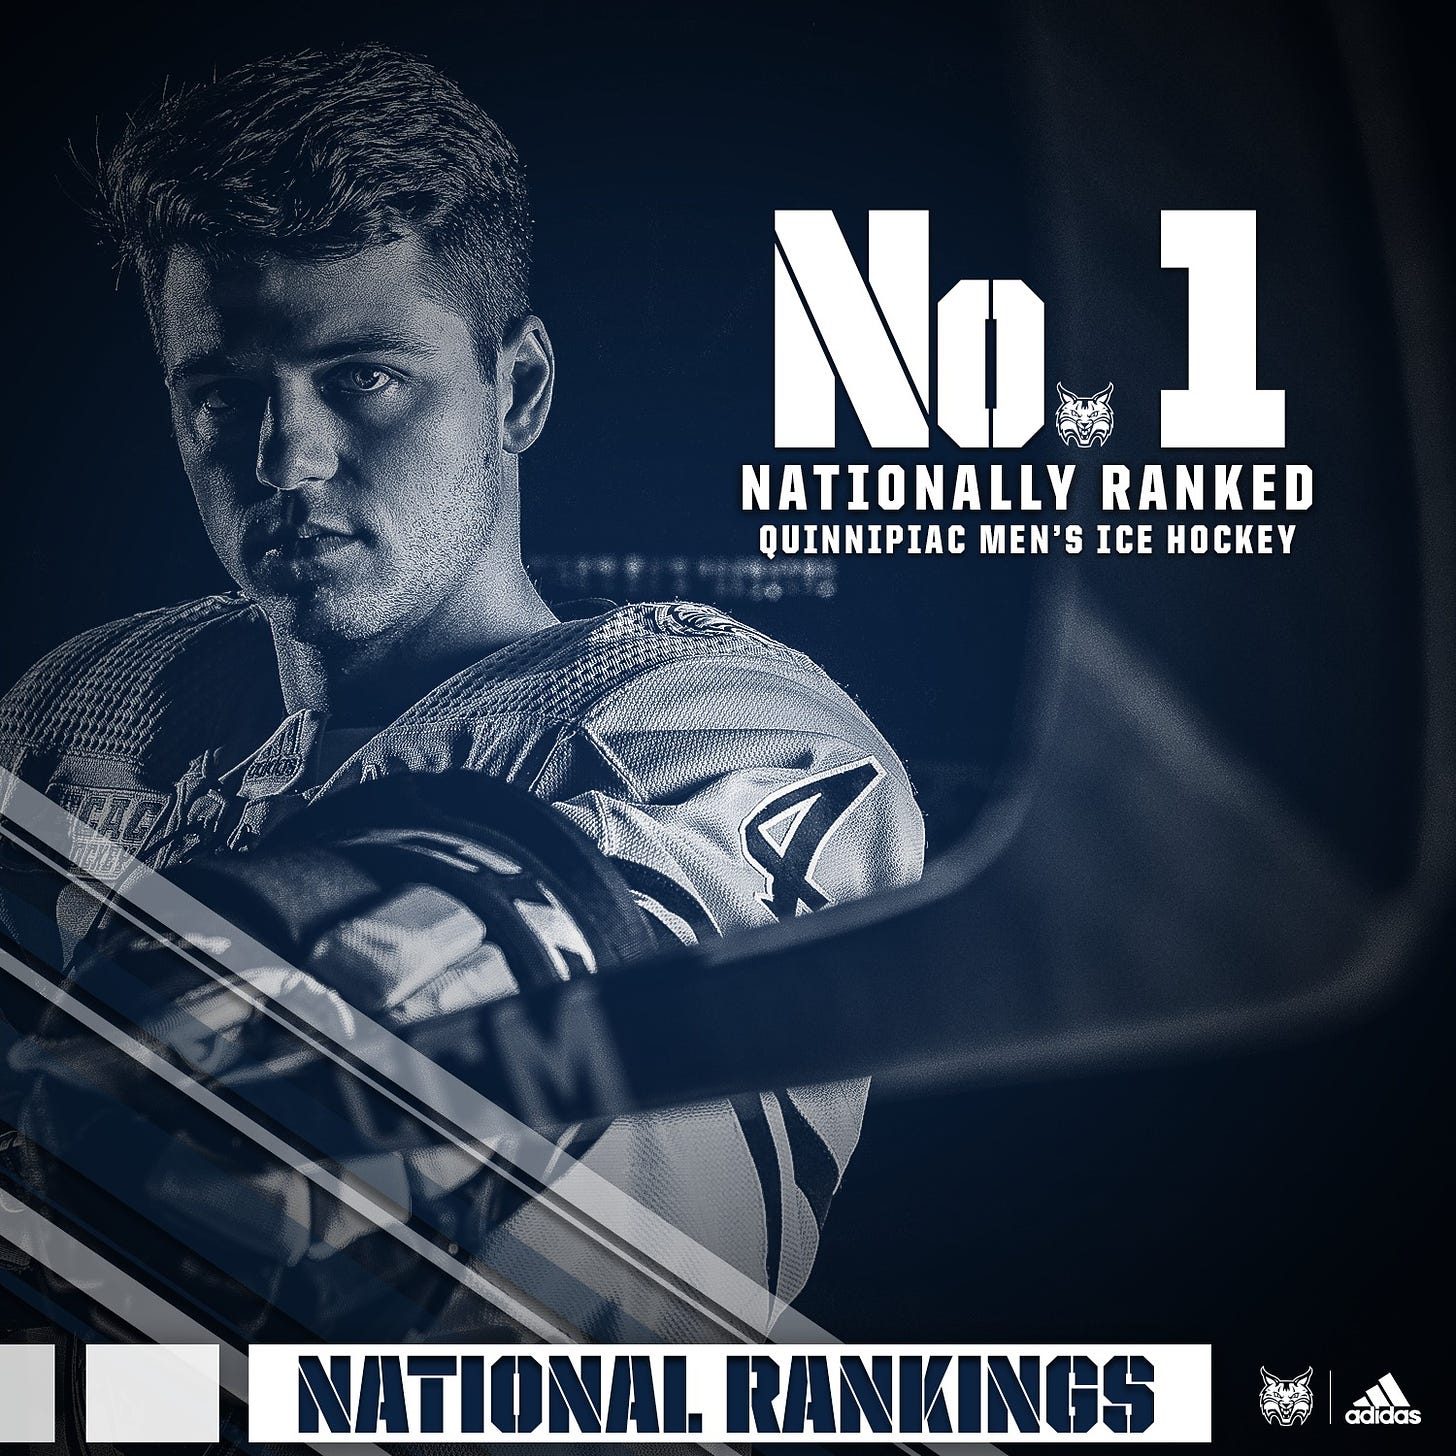 May be an image of 1 person and text that says 'No1 NATIONALLY RANKED QUINNIPIAC MEN'S ICE HOCKEY NATIONAL. RANKINGS adidas'